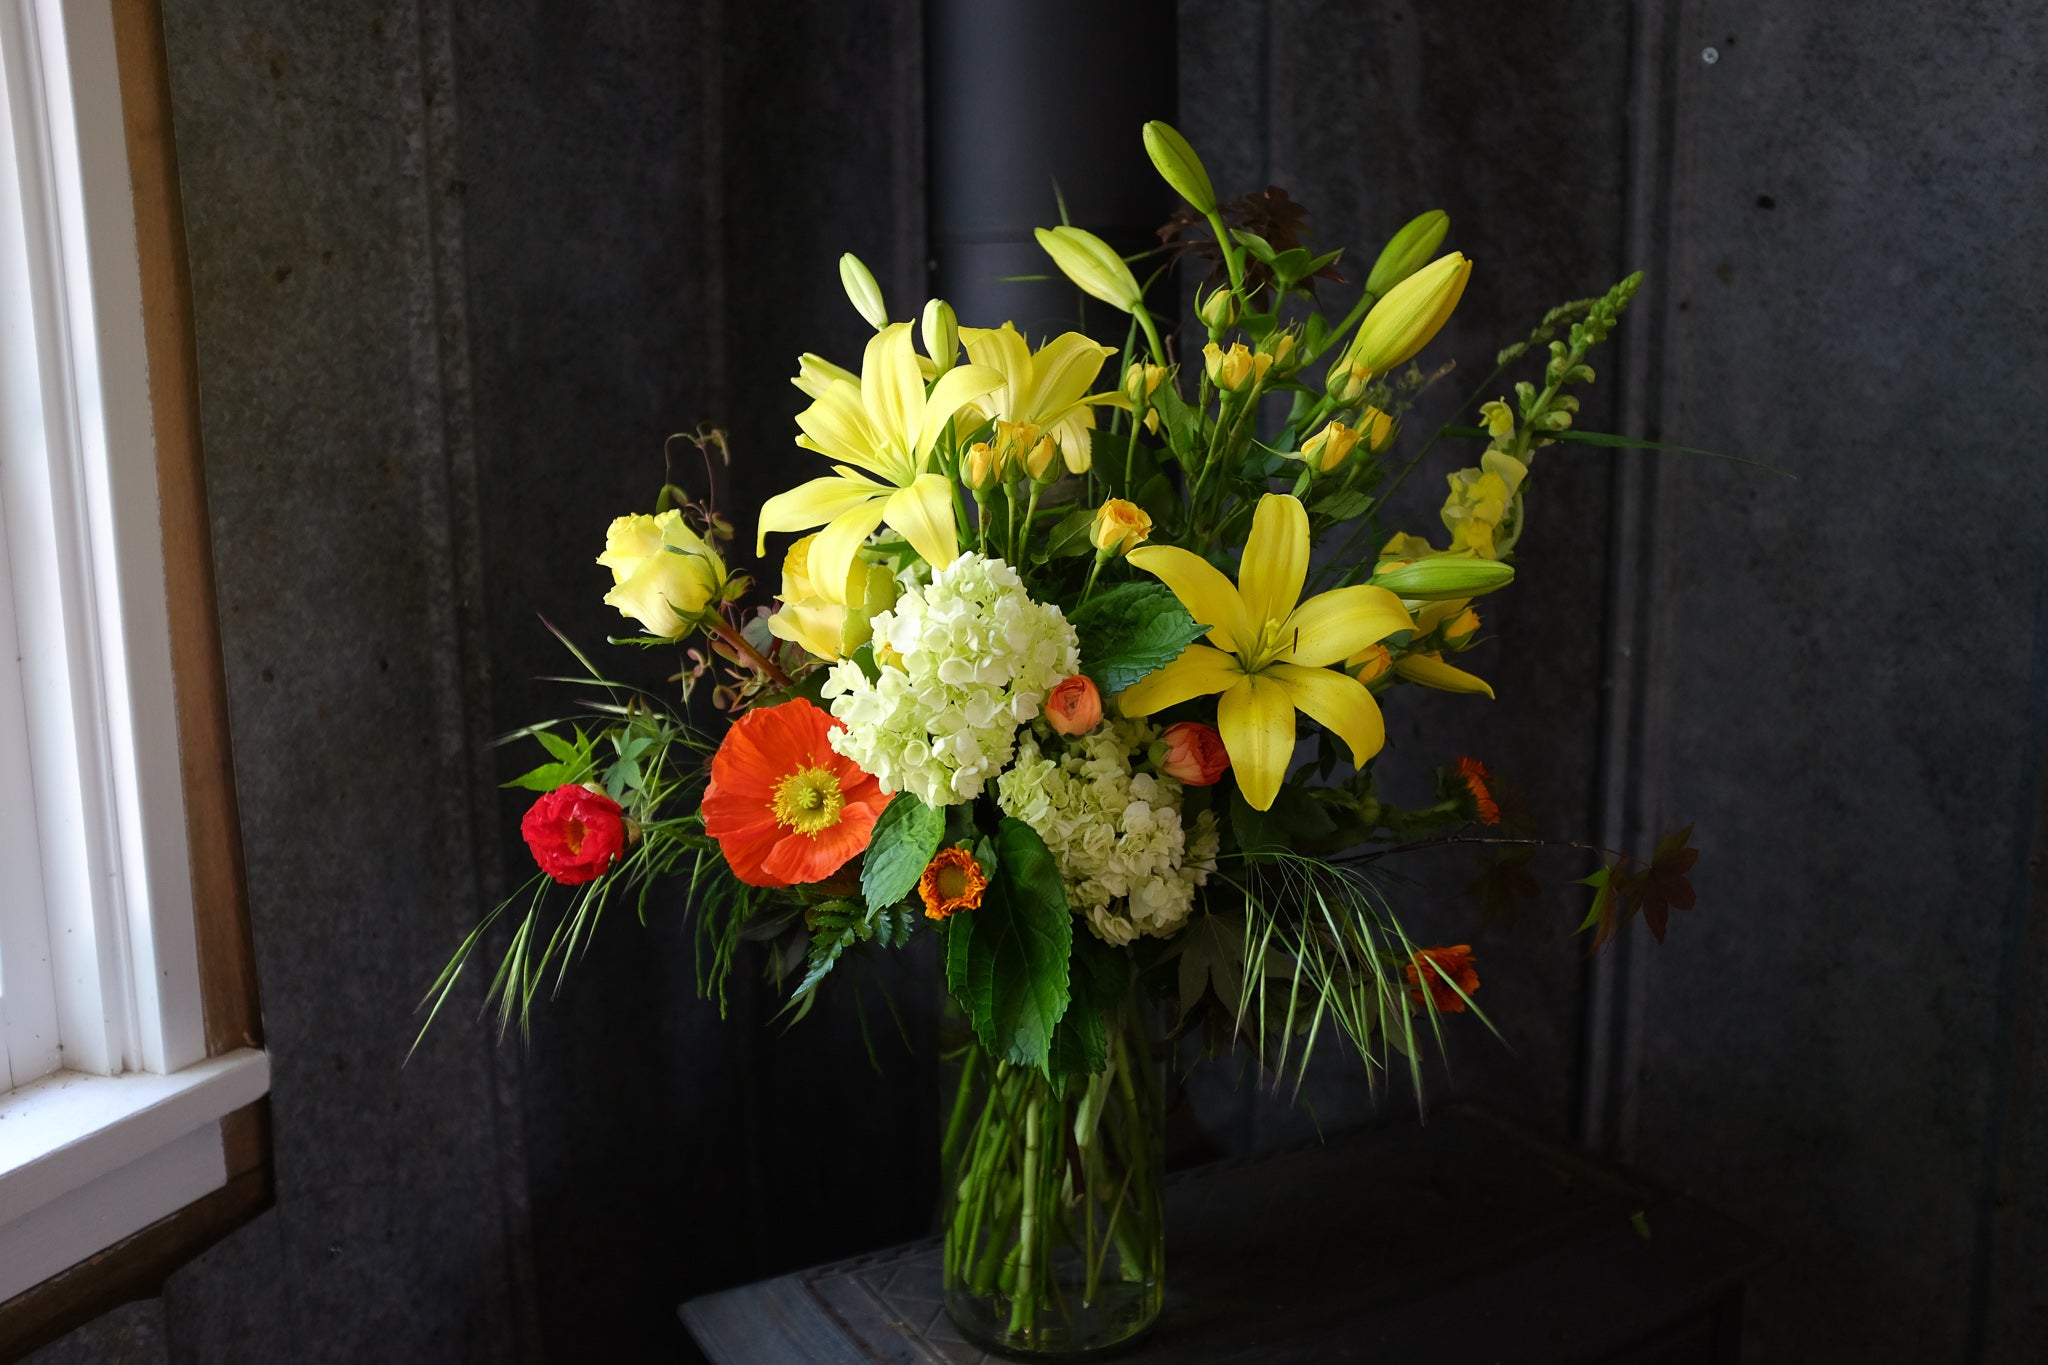 Flower design with orange poppies and yellow lilies by Michler's Florist